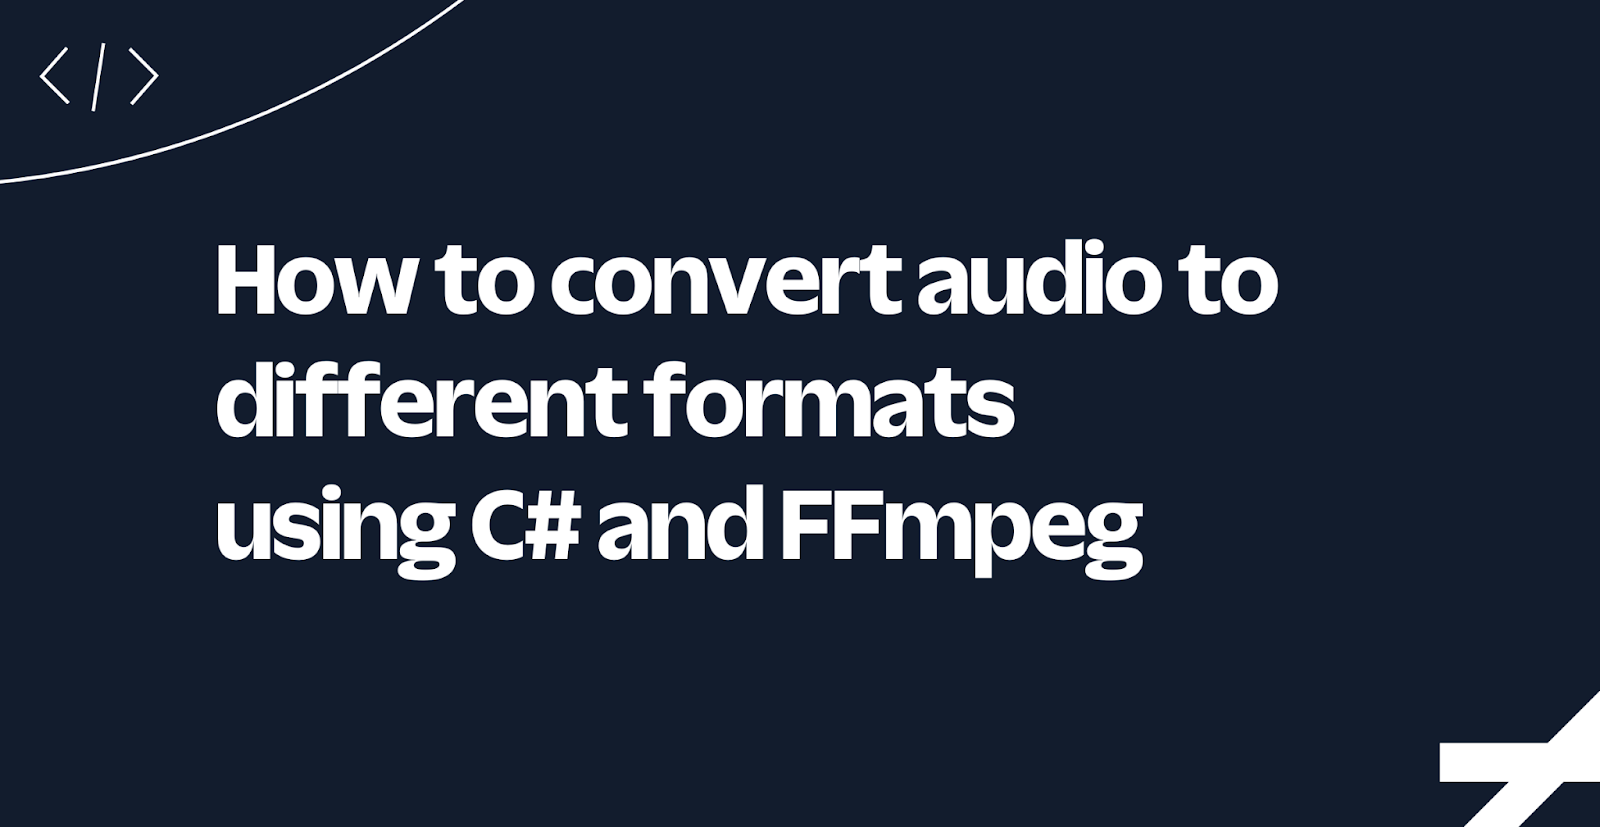 How to convert audio to different formats using C# and FFmpeg